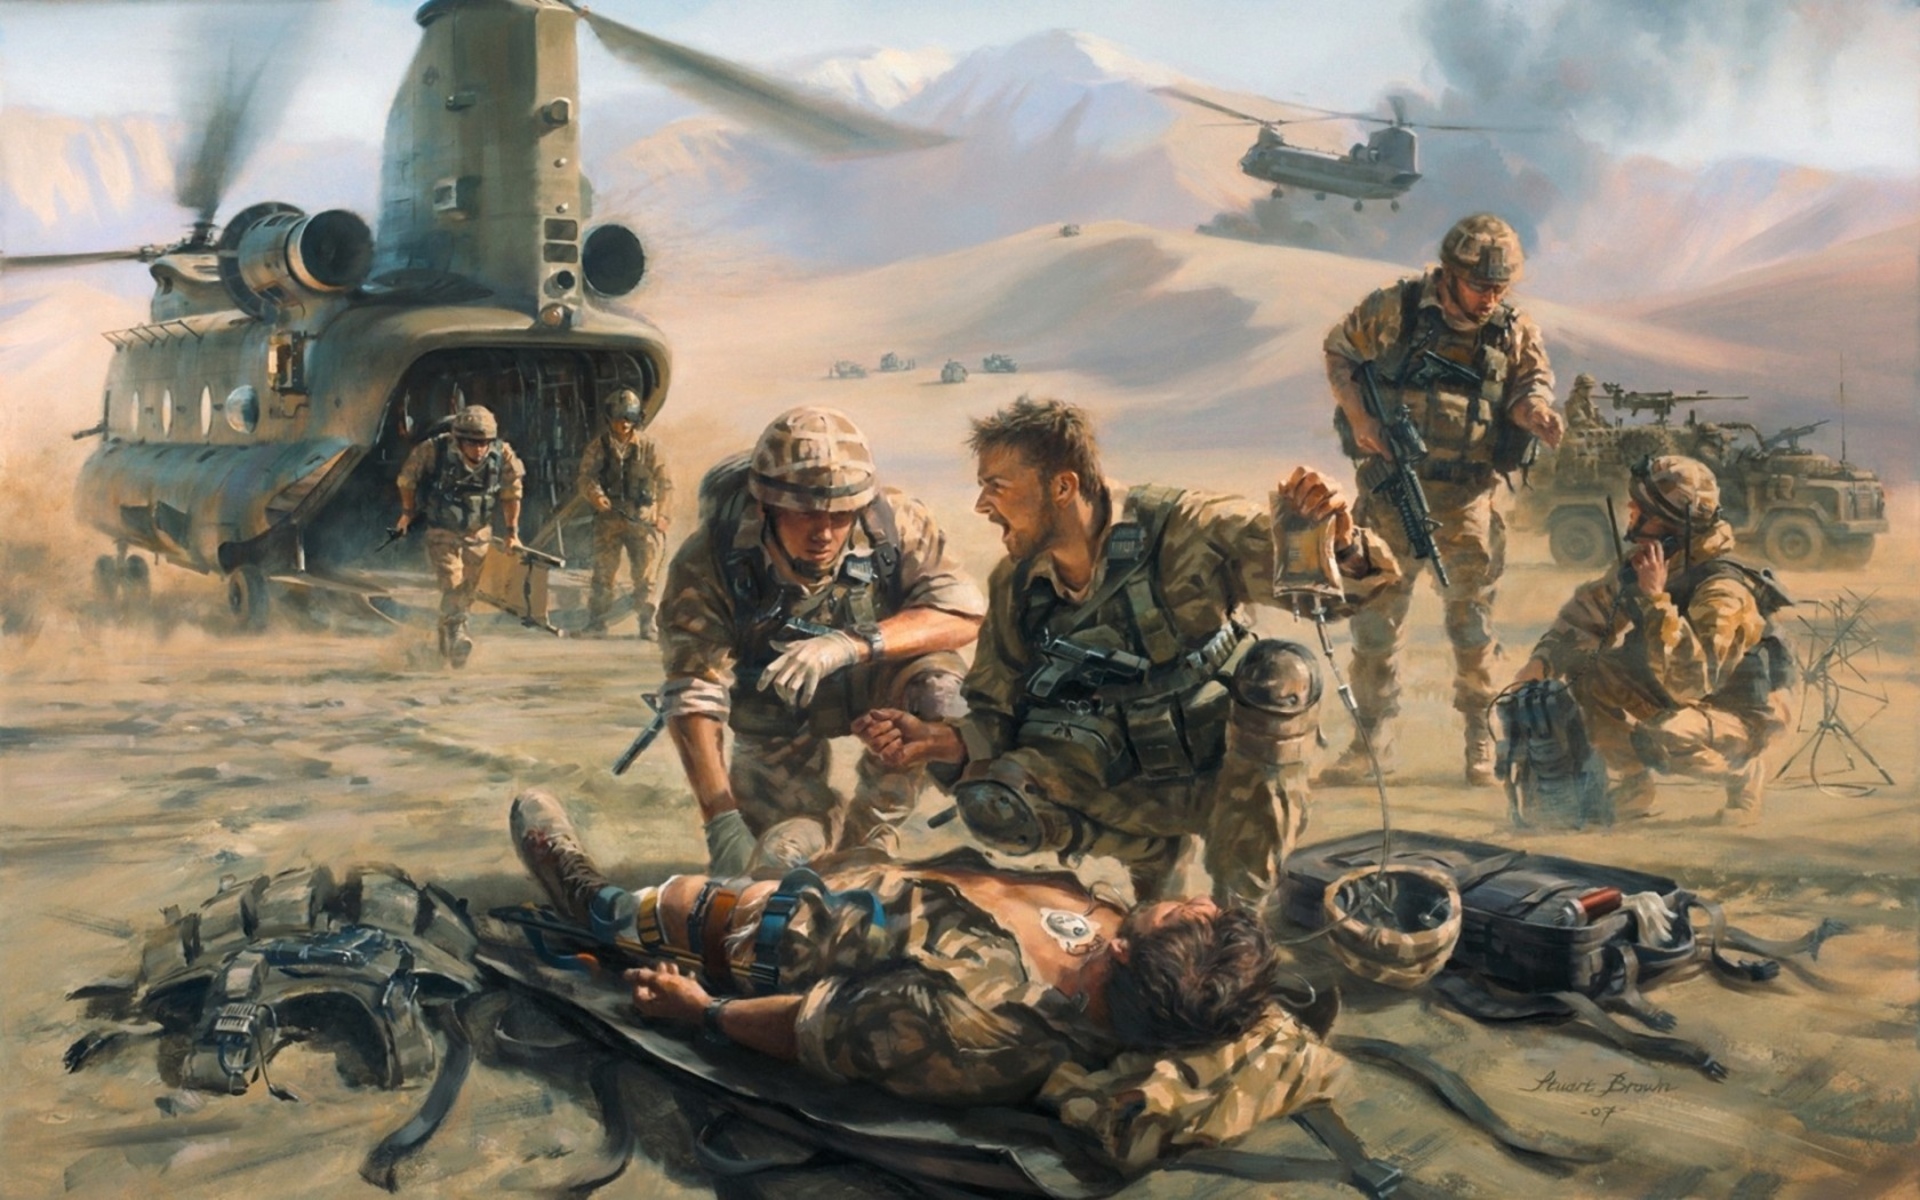 art, Painting, Military, Battles, War, Warriors, Soldiers, Vehicles, Helicopters, Weapons, Landscapes Wallpaper